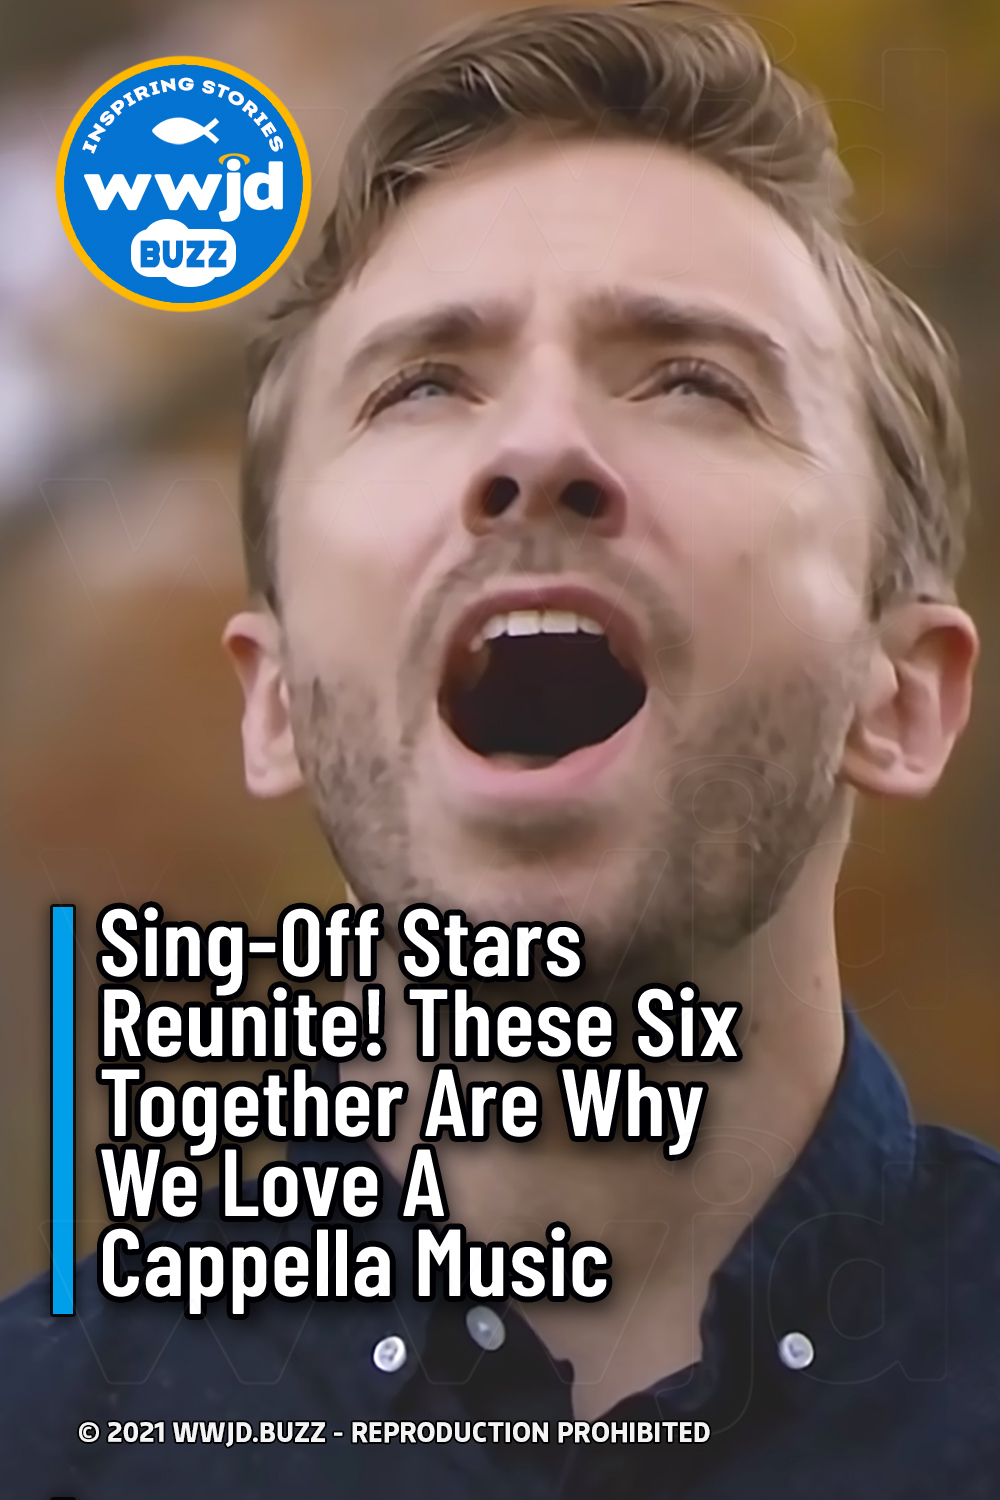 Sing-Off Stars Reunite! These Six Together Are Why We Love A Cappella Music